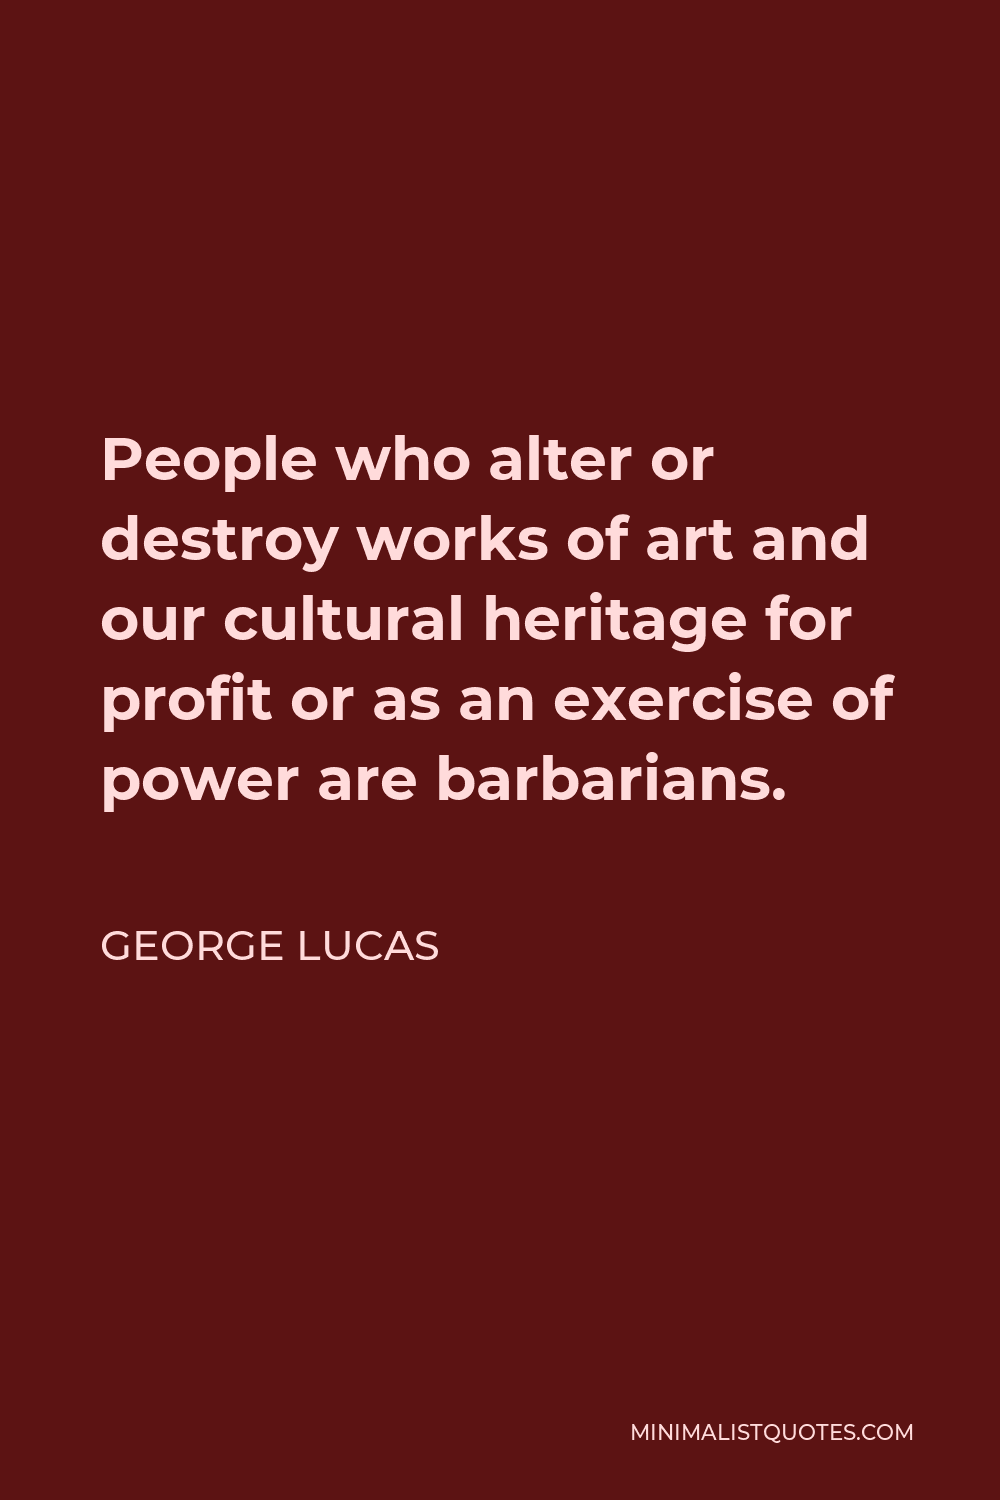 George Lucas Quote - People who alter or destroy works of art and our cultural heritage for profit or as an exercise of power are barbarians.